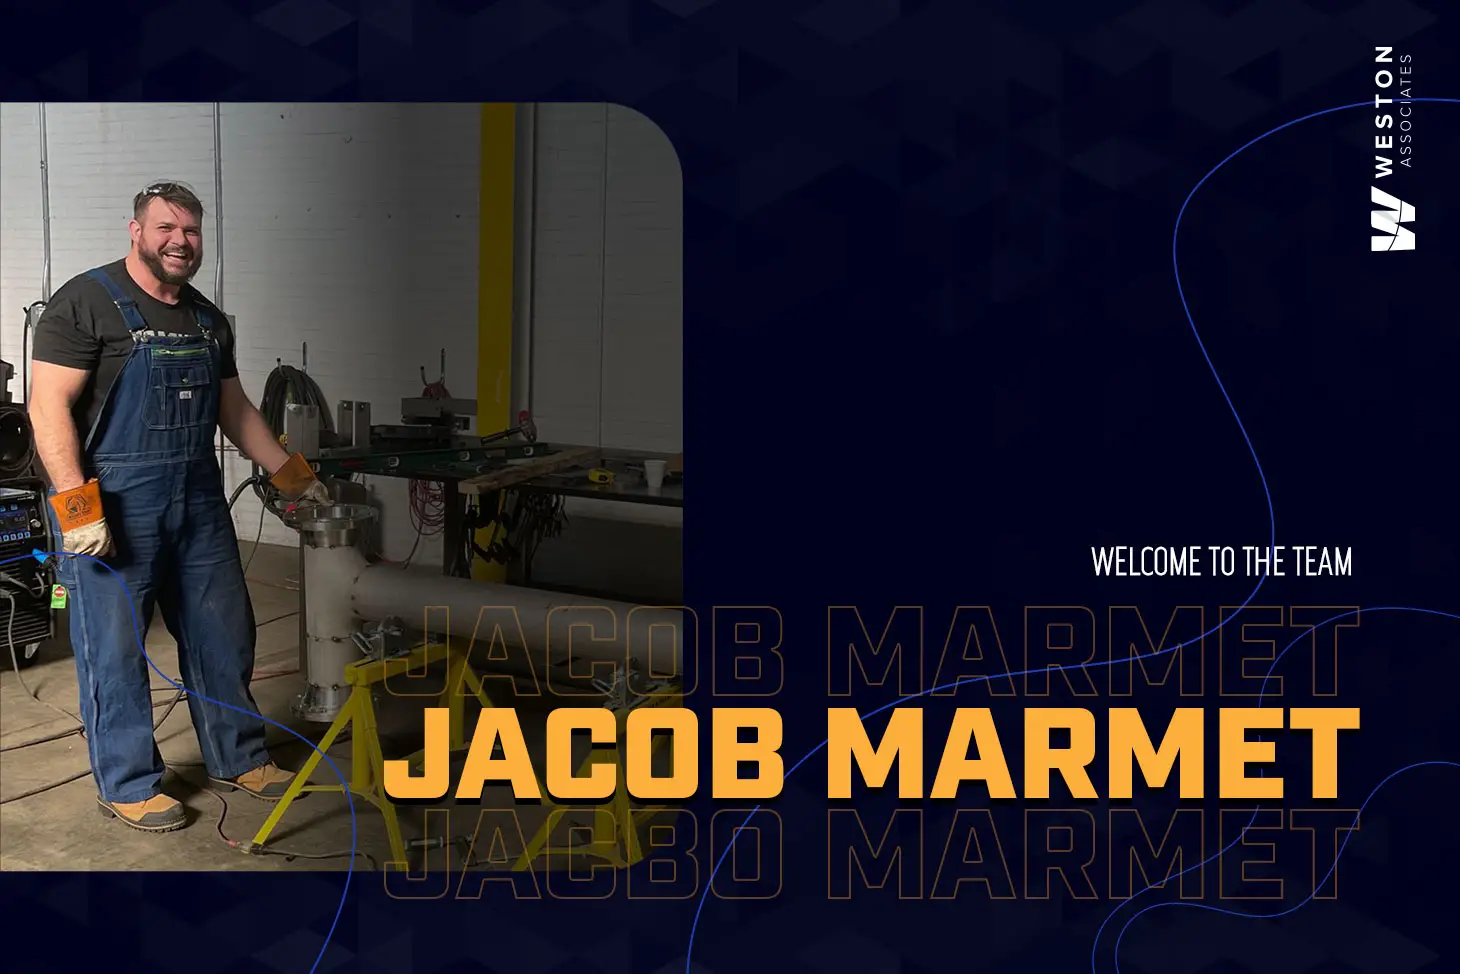 We are excited to welcome Jacob Marmet! blog image